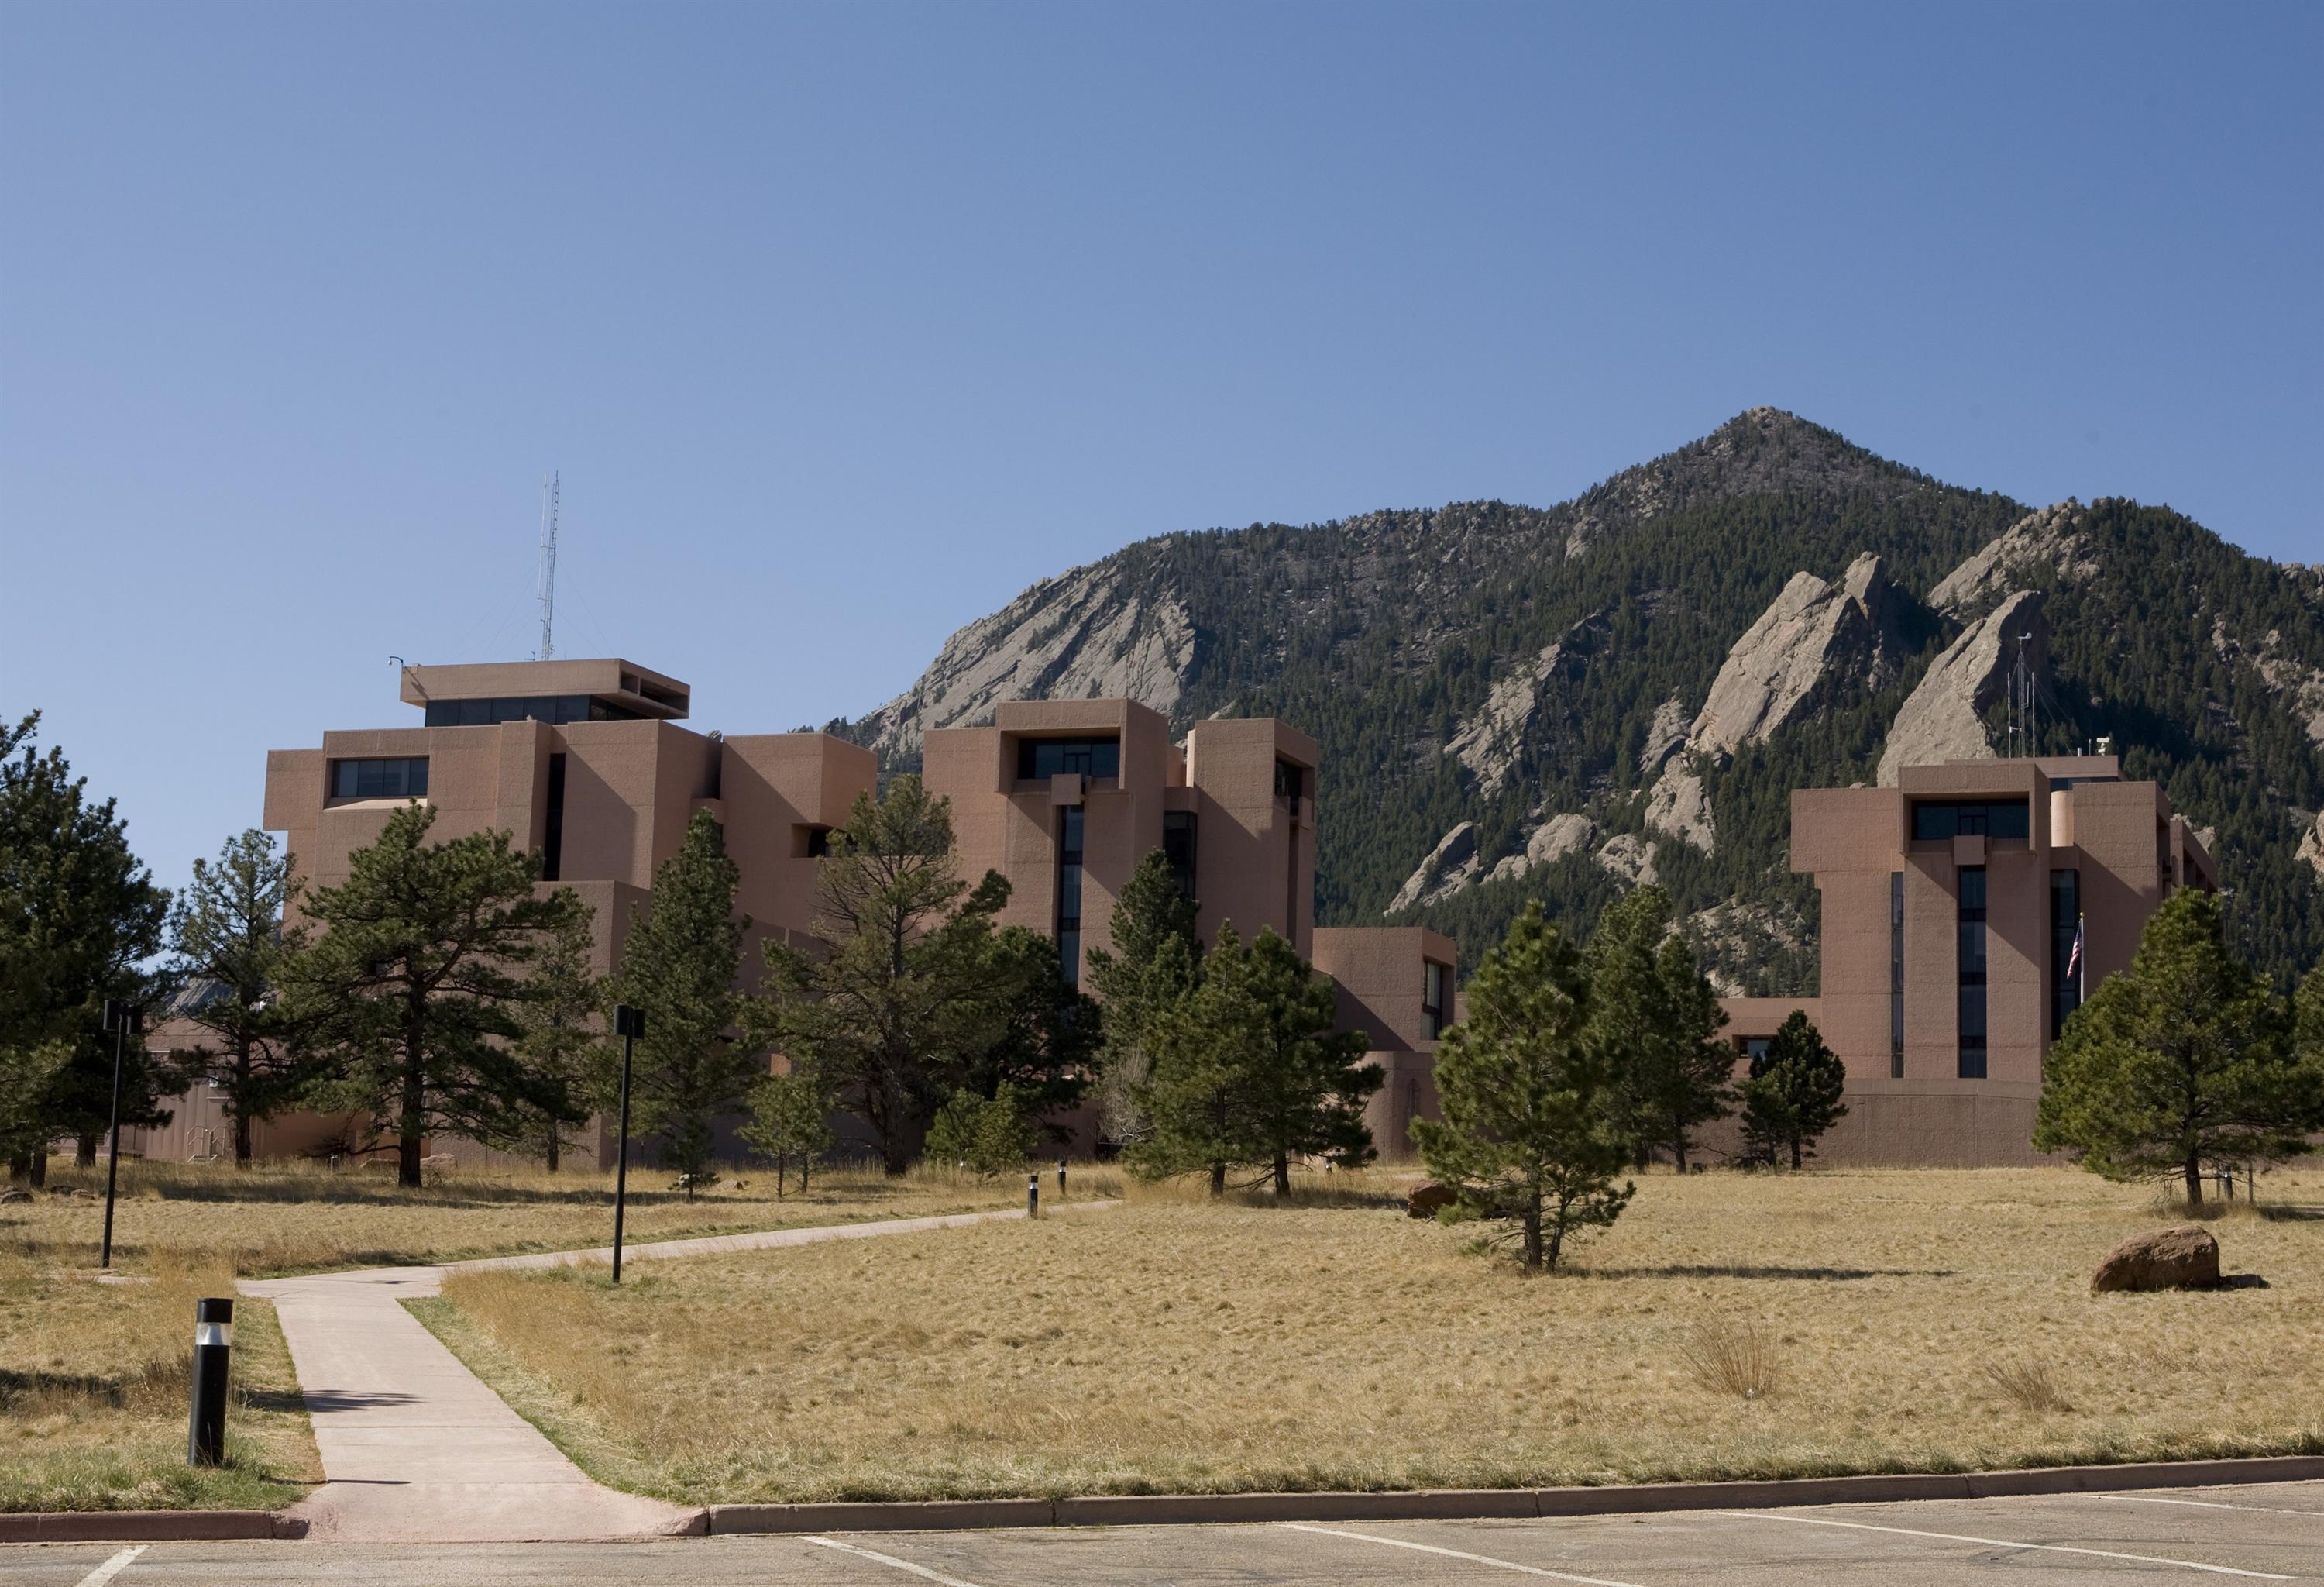 National Center for Atmospheric Research - NCAR | 1850 Table Mesa Dr, Boulder, CO, 80305 | +1 (303) 497-1174